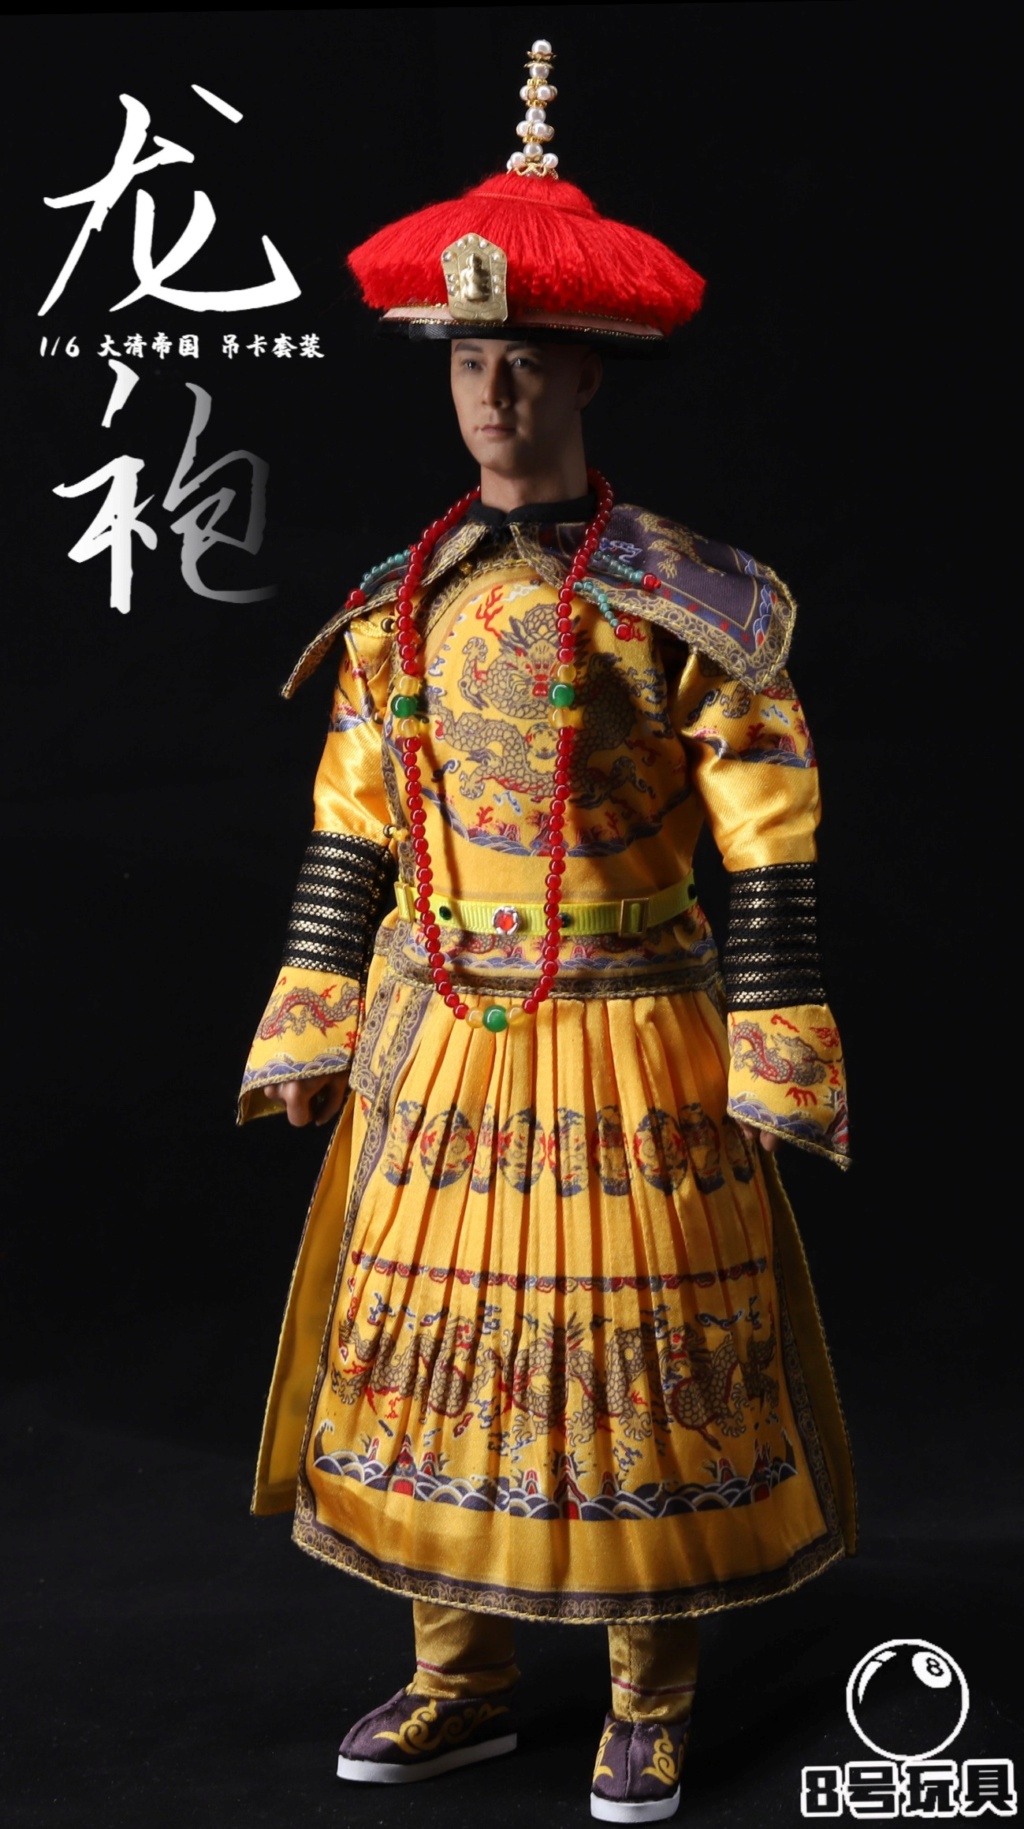 Historical - NEW PRODUCT: New Model No. 8: 1/6 Emperor Qing Dynasty Dragon Robe Set  20301612